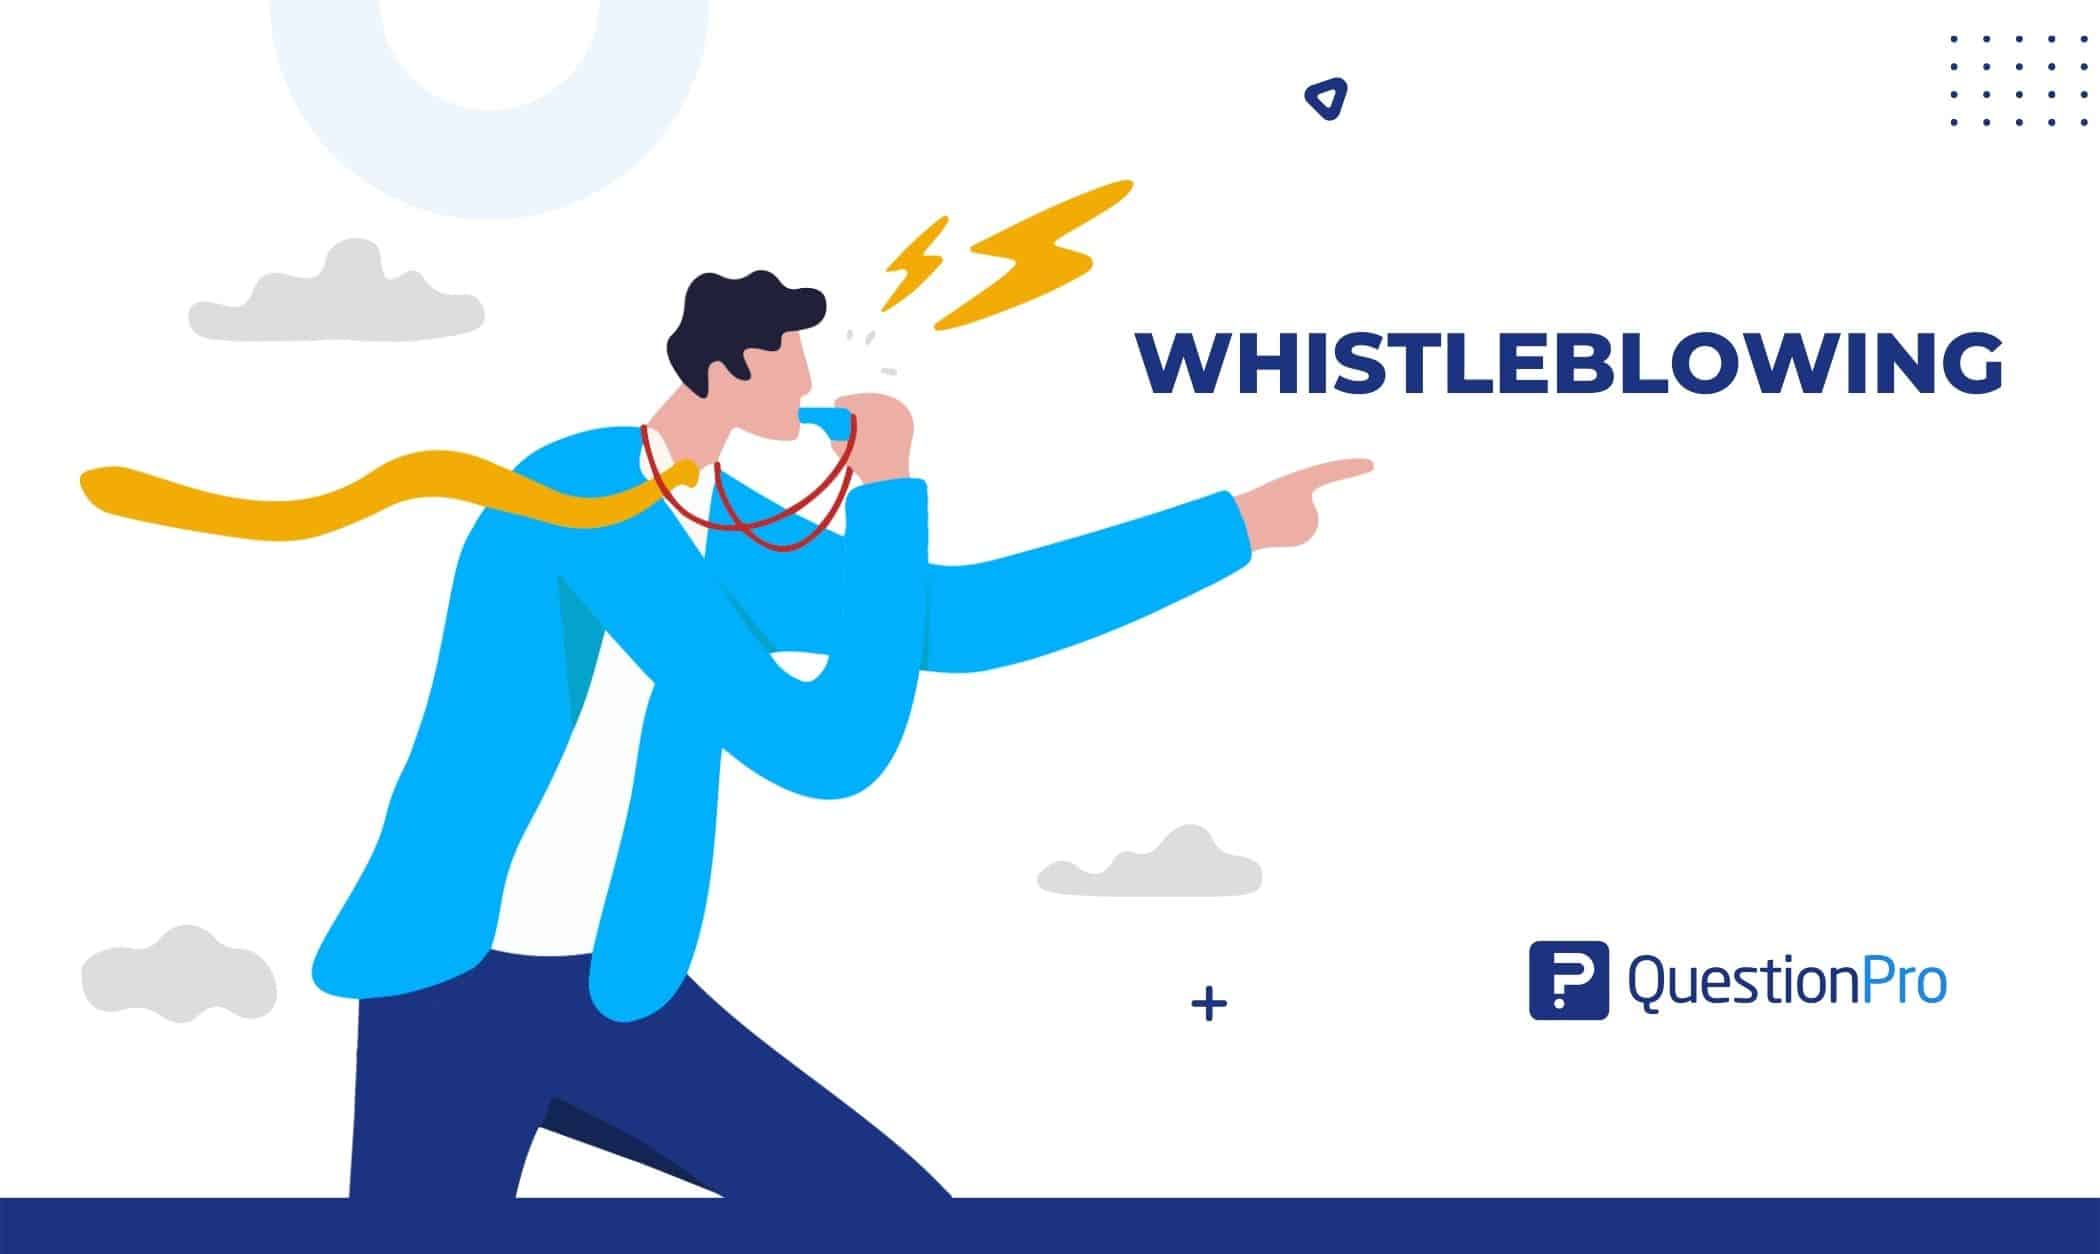 Whistleblowing in the workplace occurs when an employee reports misconduct in an organization, such as corruption, mismanagement, or bias.